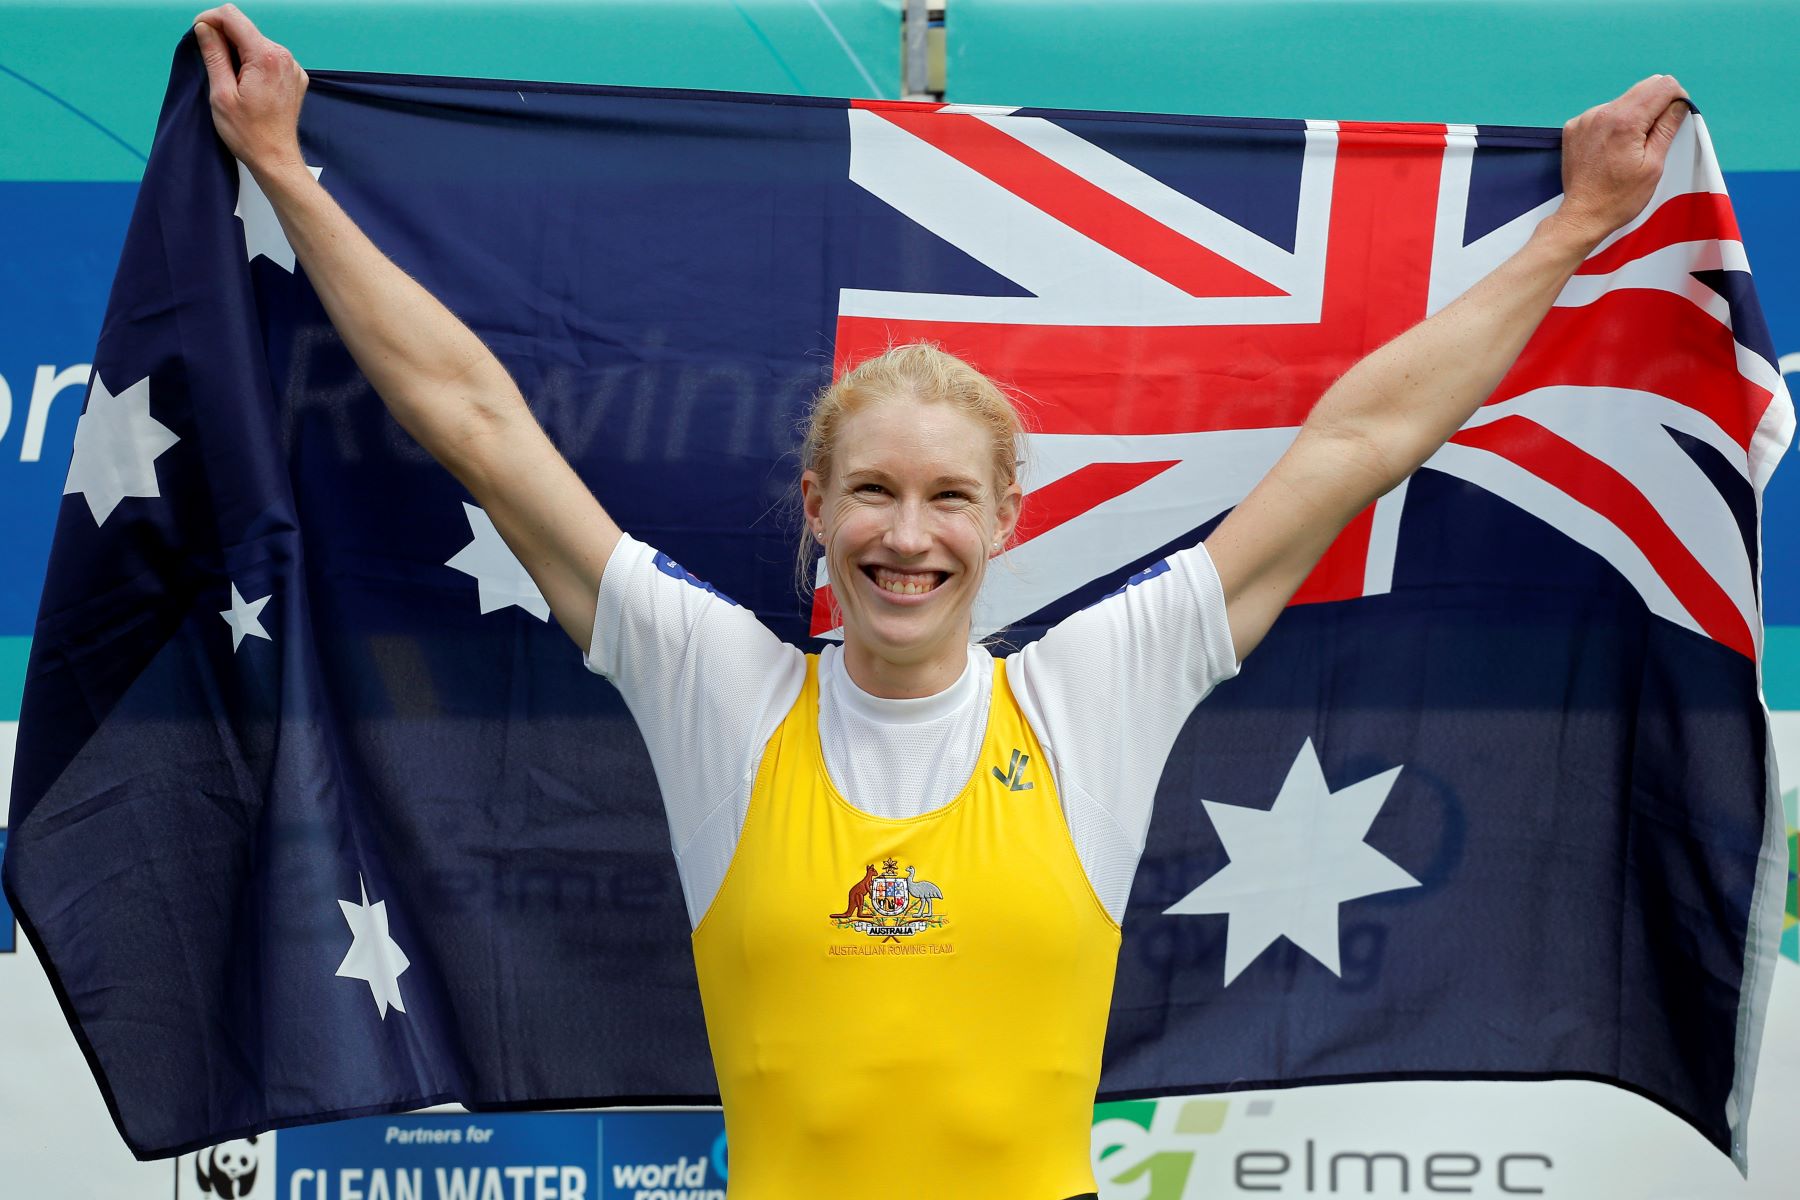 Australian Olympic rower Kim Crow celebrates on the podium after winning the Women's single sculls during the World Rowing Championships in Aiguebelette, France, Sunday, Sept. 6, 2015